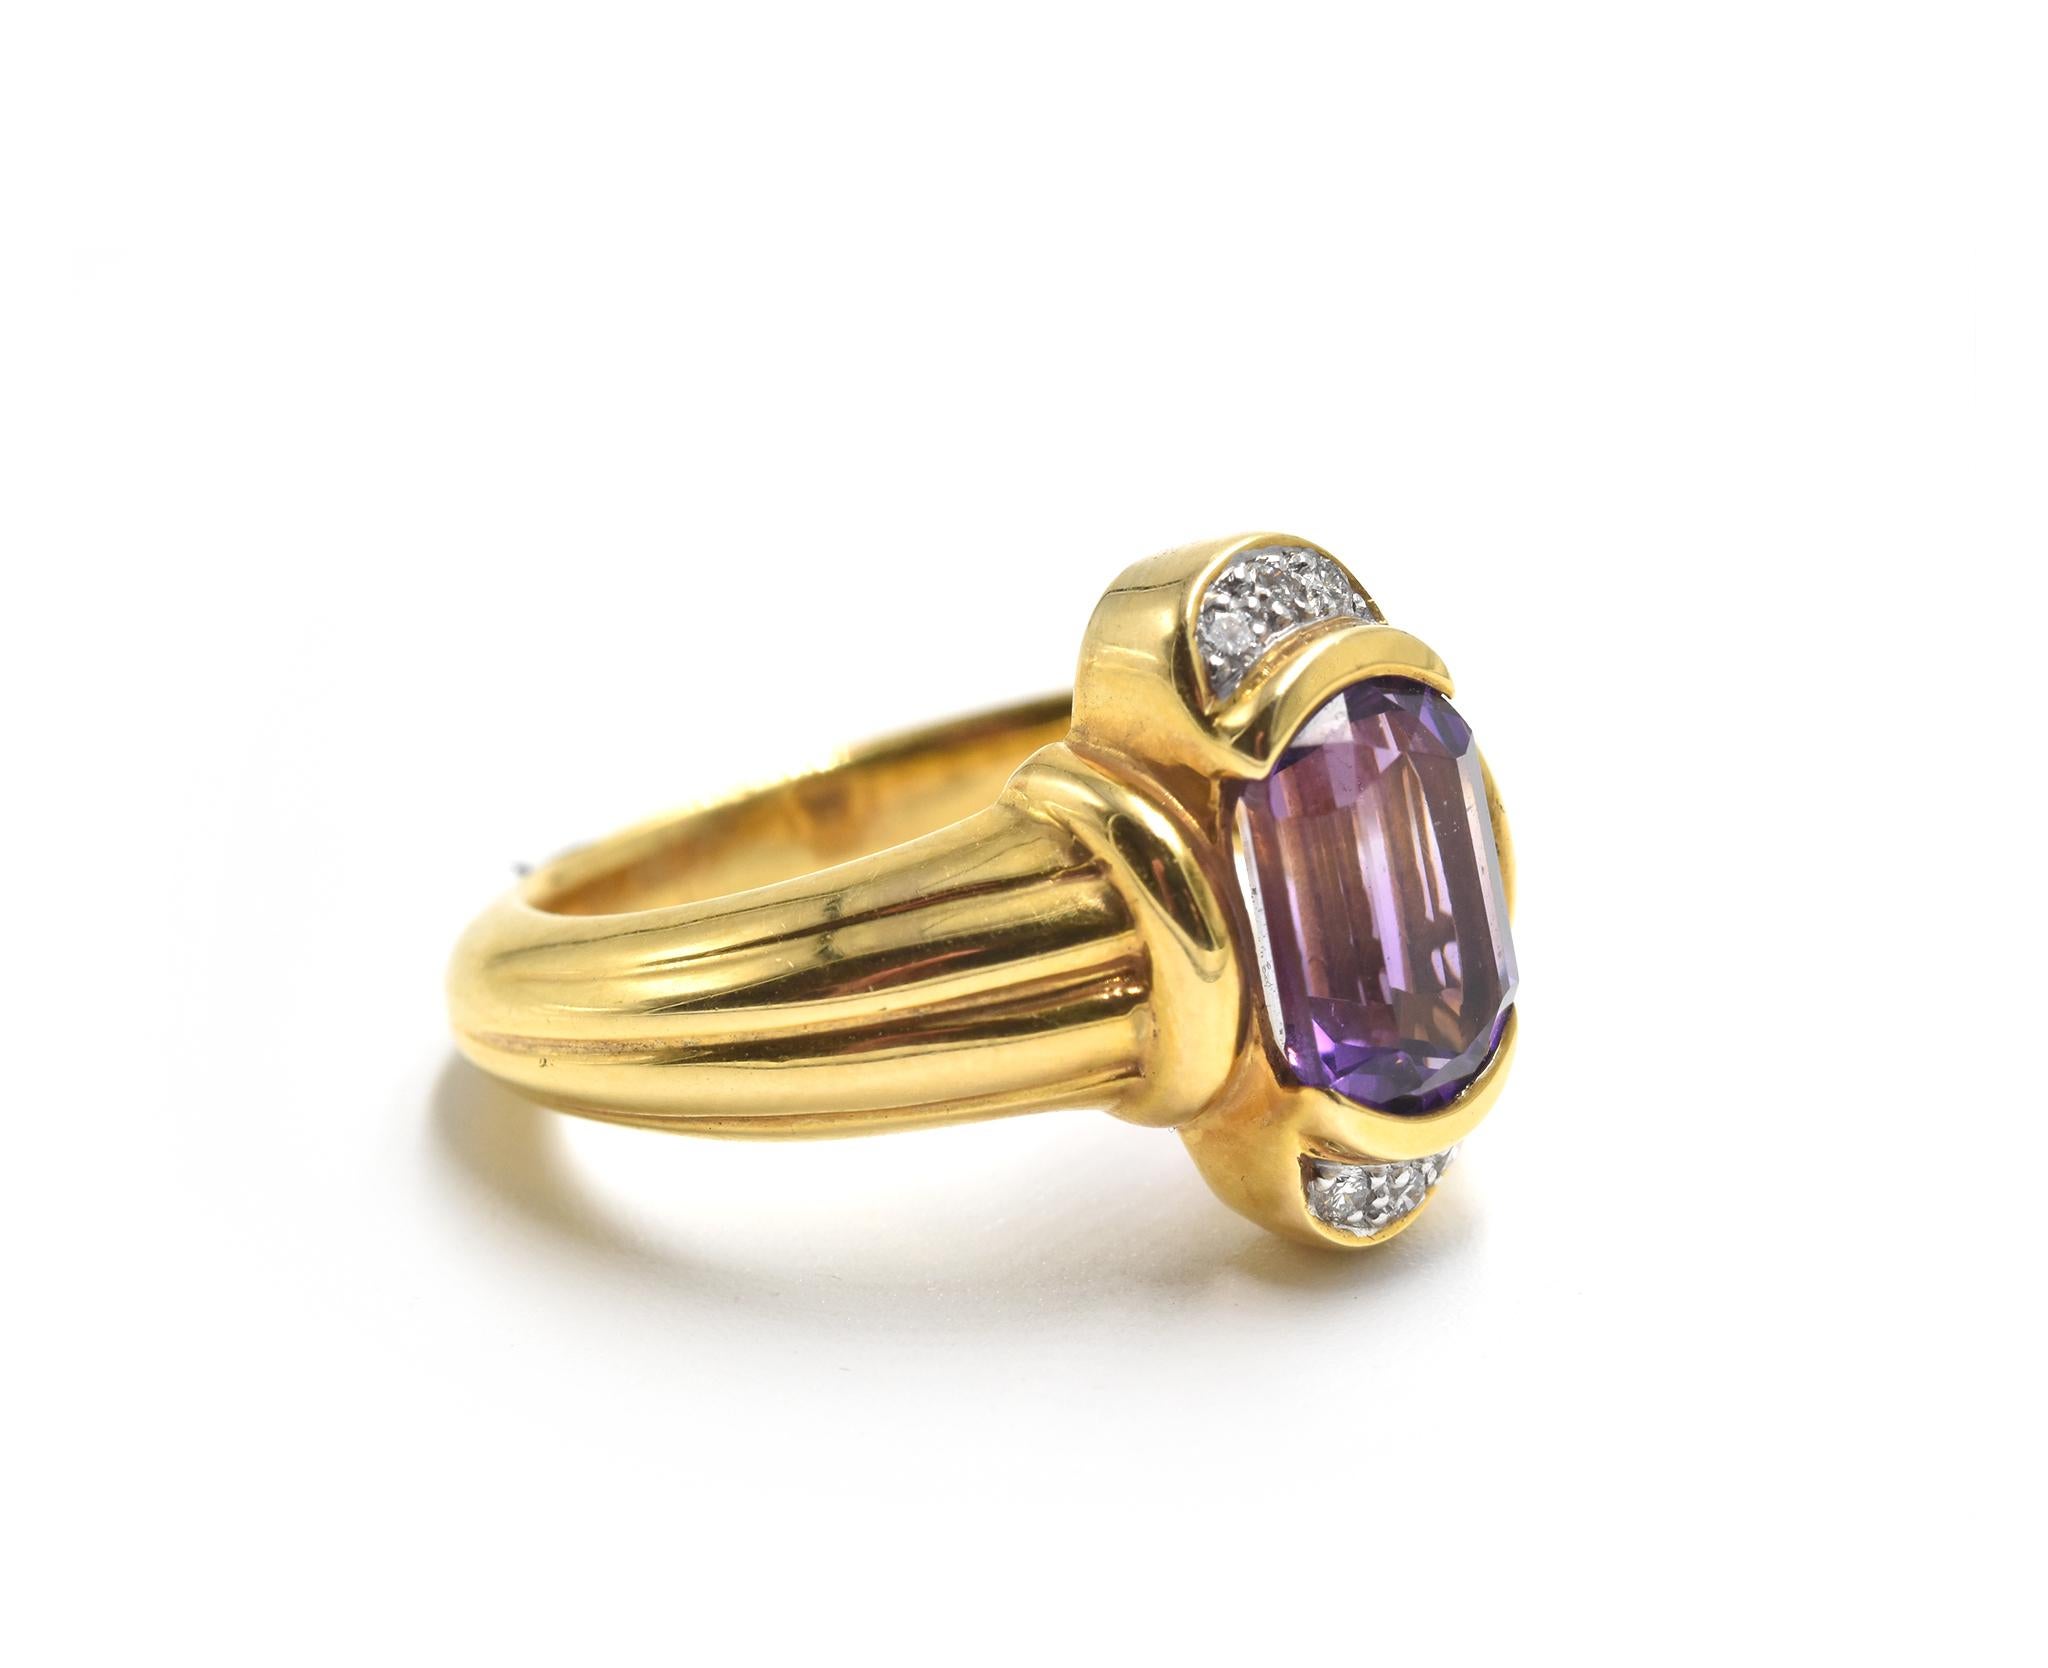 Designer: custom design
Material: 18k yellow gold
Amethyst: one 1.60 carat amethyst gemstone
Diamonds: six round brilliant cut diamonds = 0.10 carat weight
Dimensions: ring top measures 1/2-inch long
Ring Size: 6 3/4 (please allow two additional